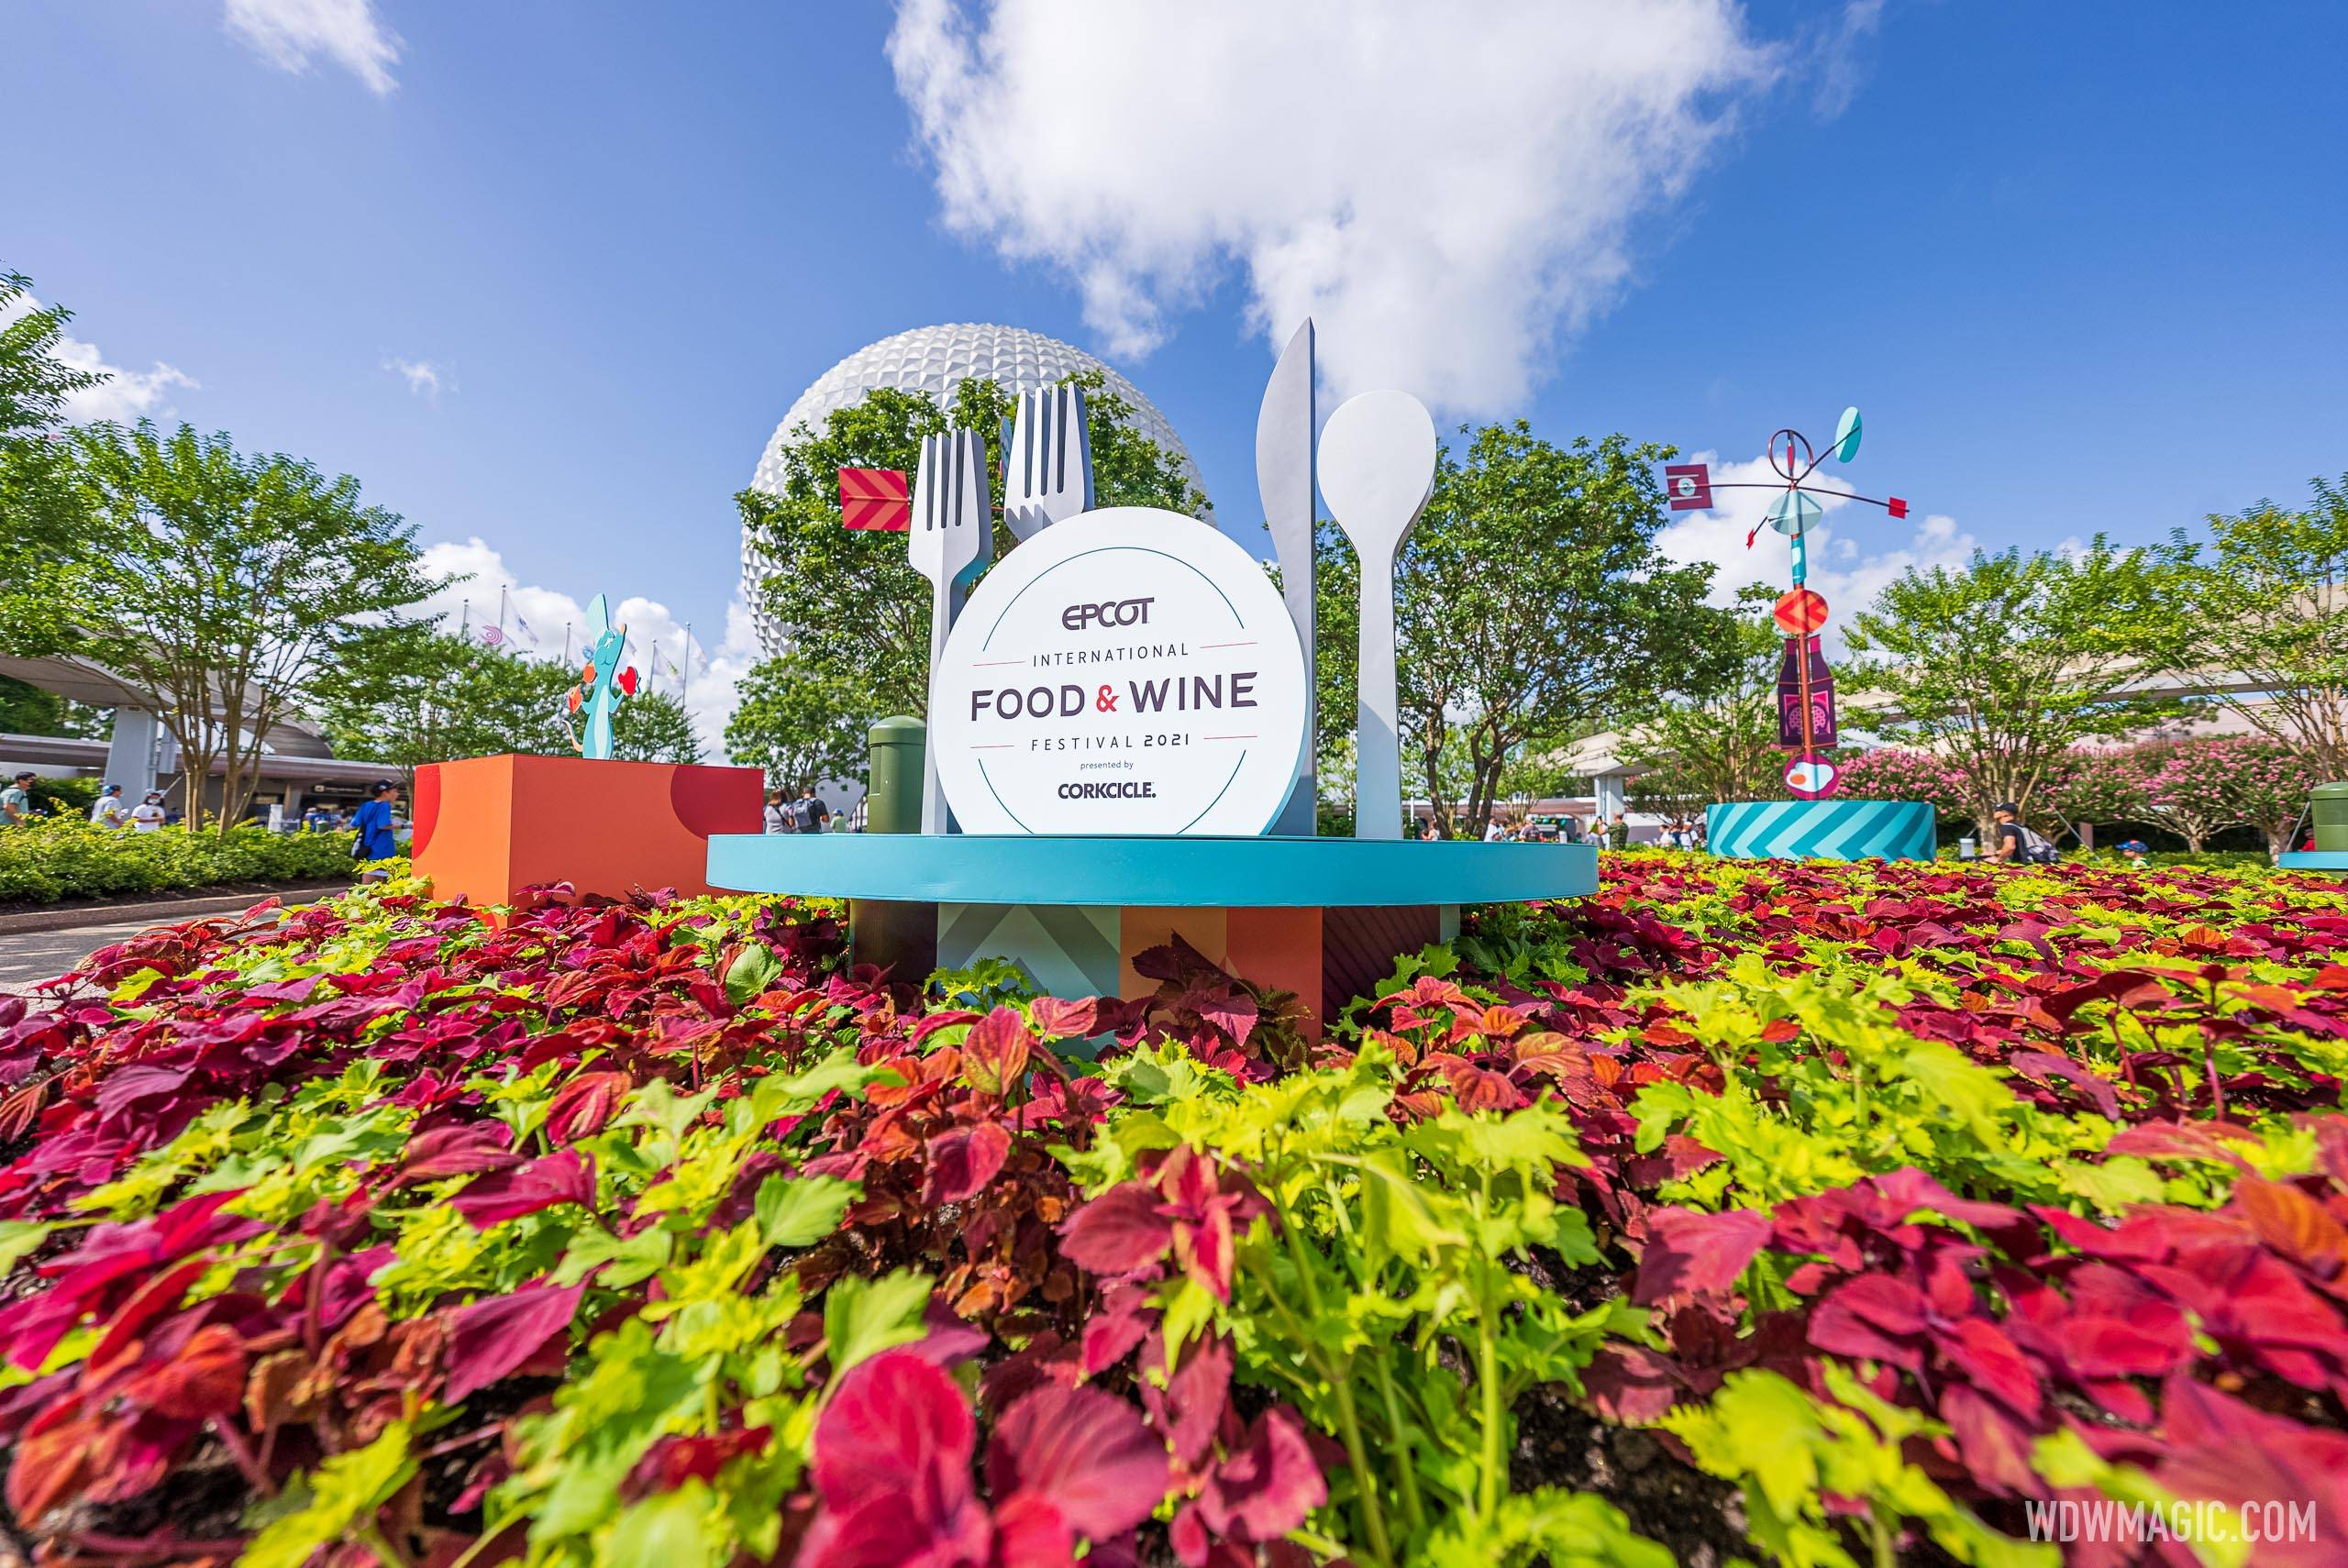 EPCOT is busier than usual on weekends due to the Food and Wine Festival